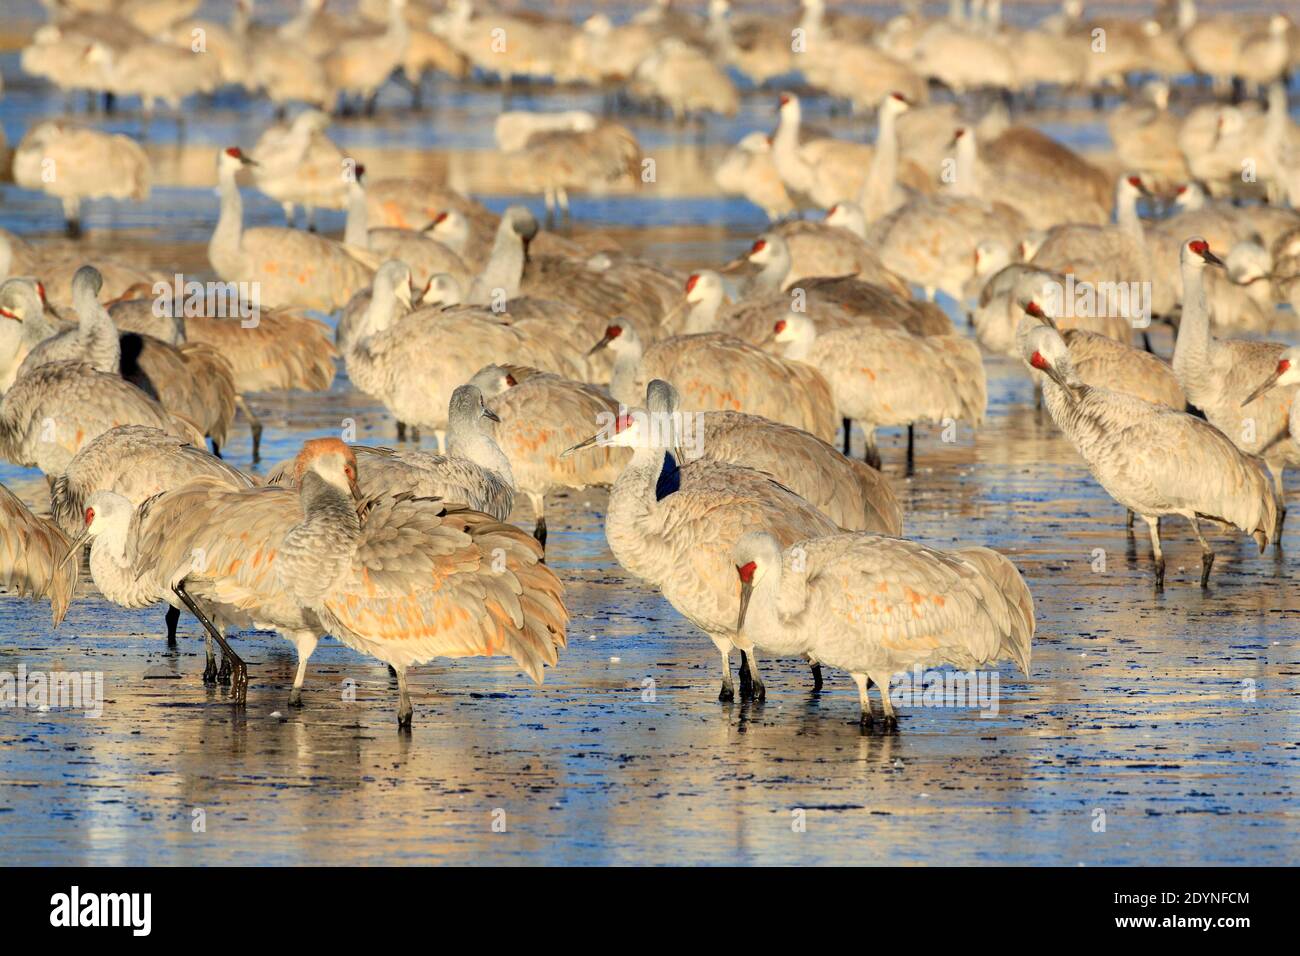 Flock of Canada cranes standing in the water, Bosque del Apache National Wildlife Refuge, New Mexico, USA Stock Photo